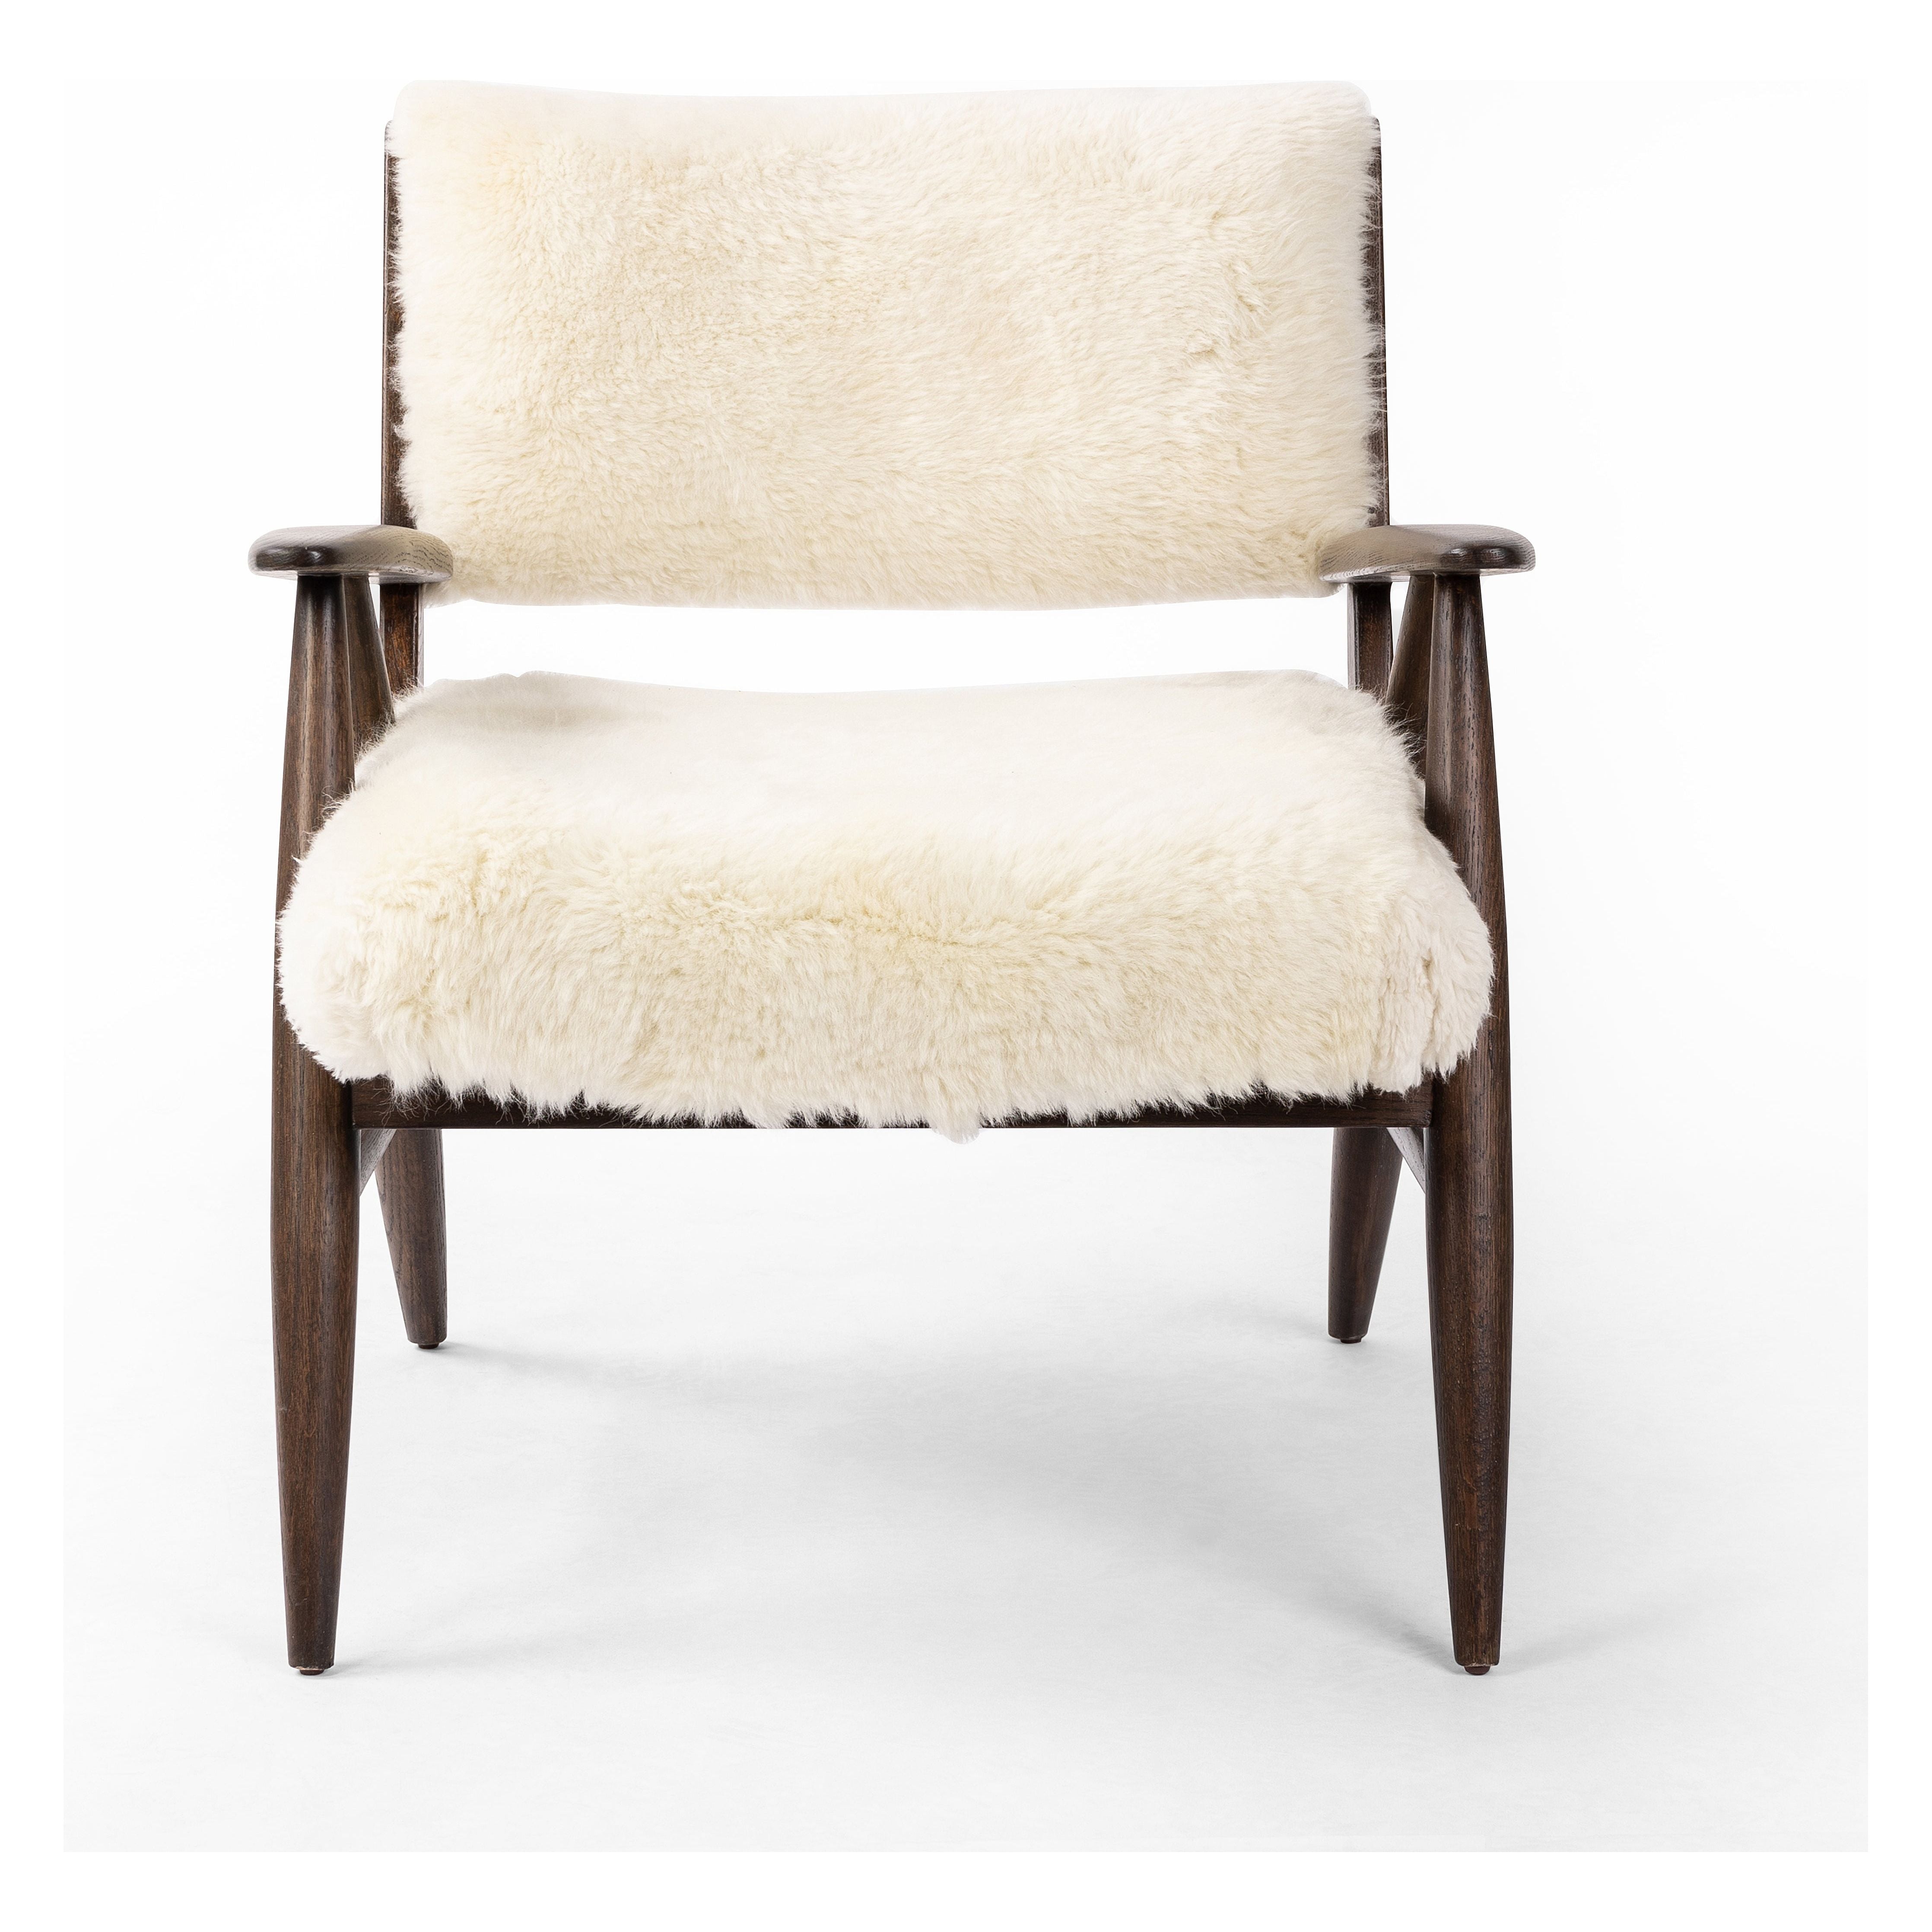 A modern take on the vintage school chair, upholstered in plush cream shearling of 100% sheepskin. Perfect as an accent chair or in pairs. Amethyst Home provides interior design, new construction, custom furniture, and area rugs in the Houston metro area.